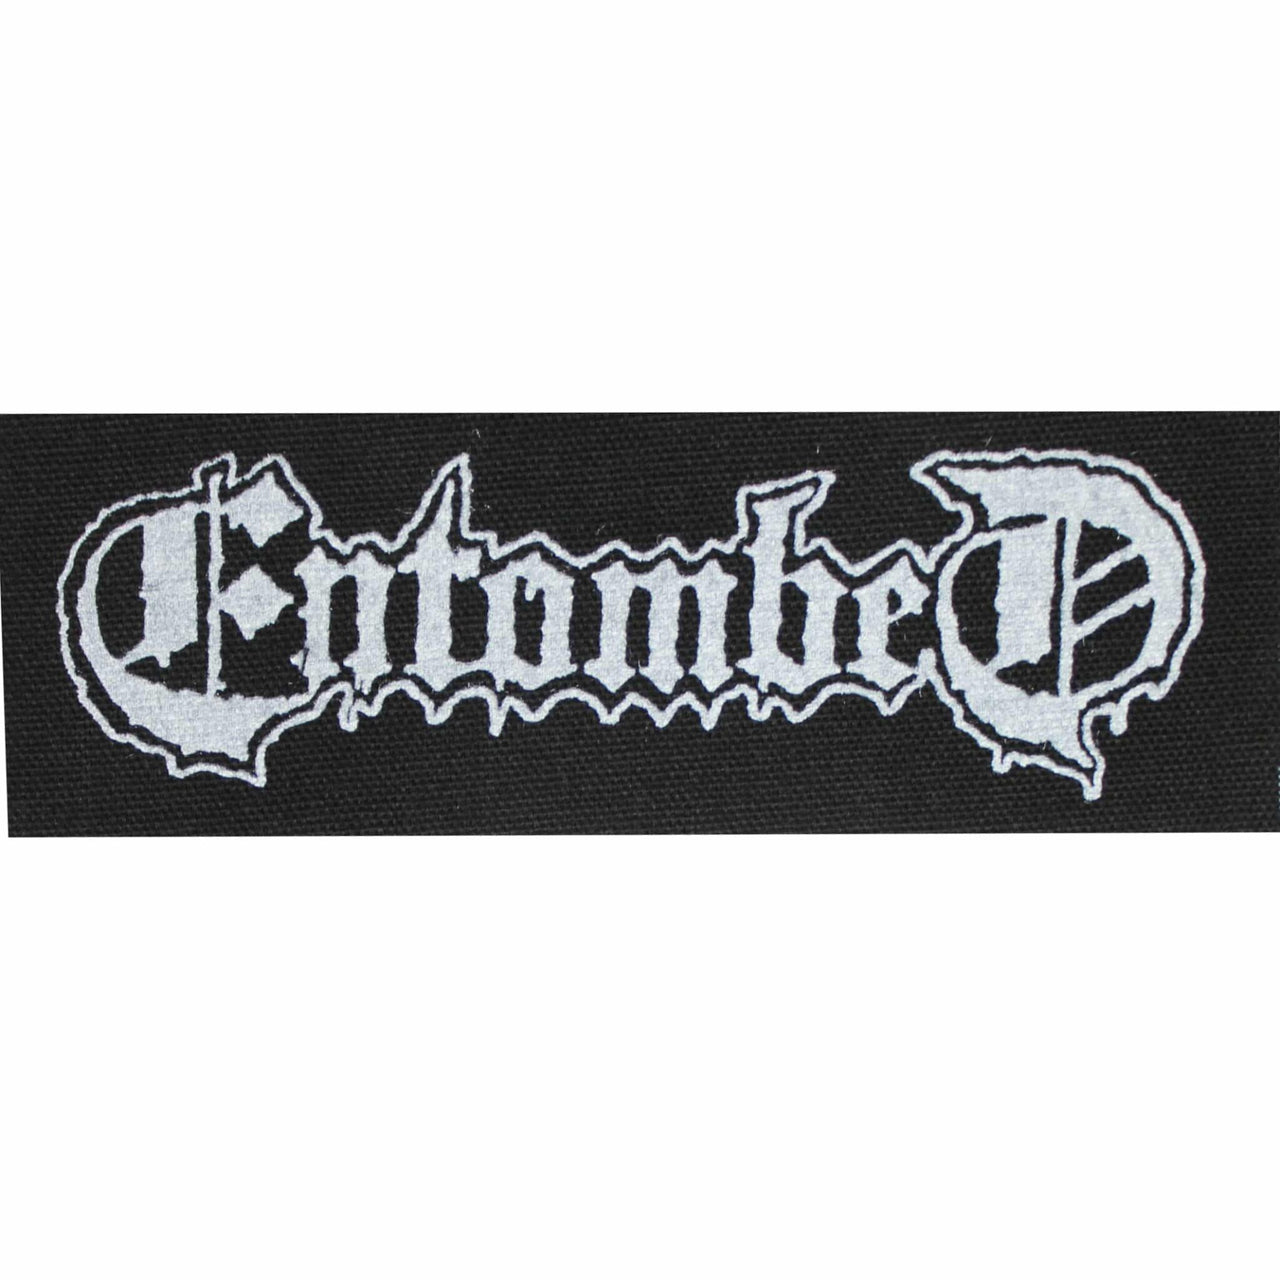 Entombed Cloth Patch